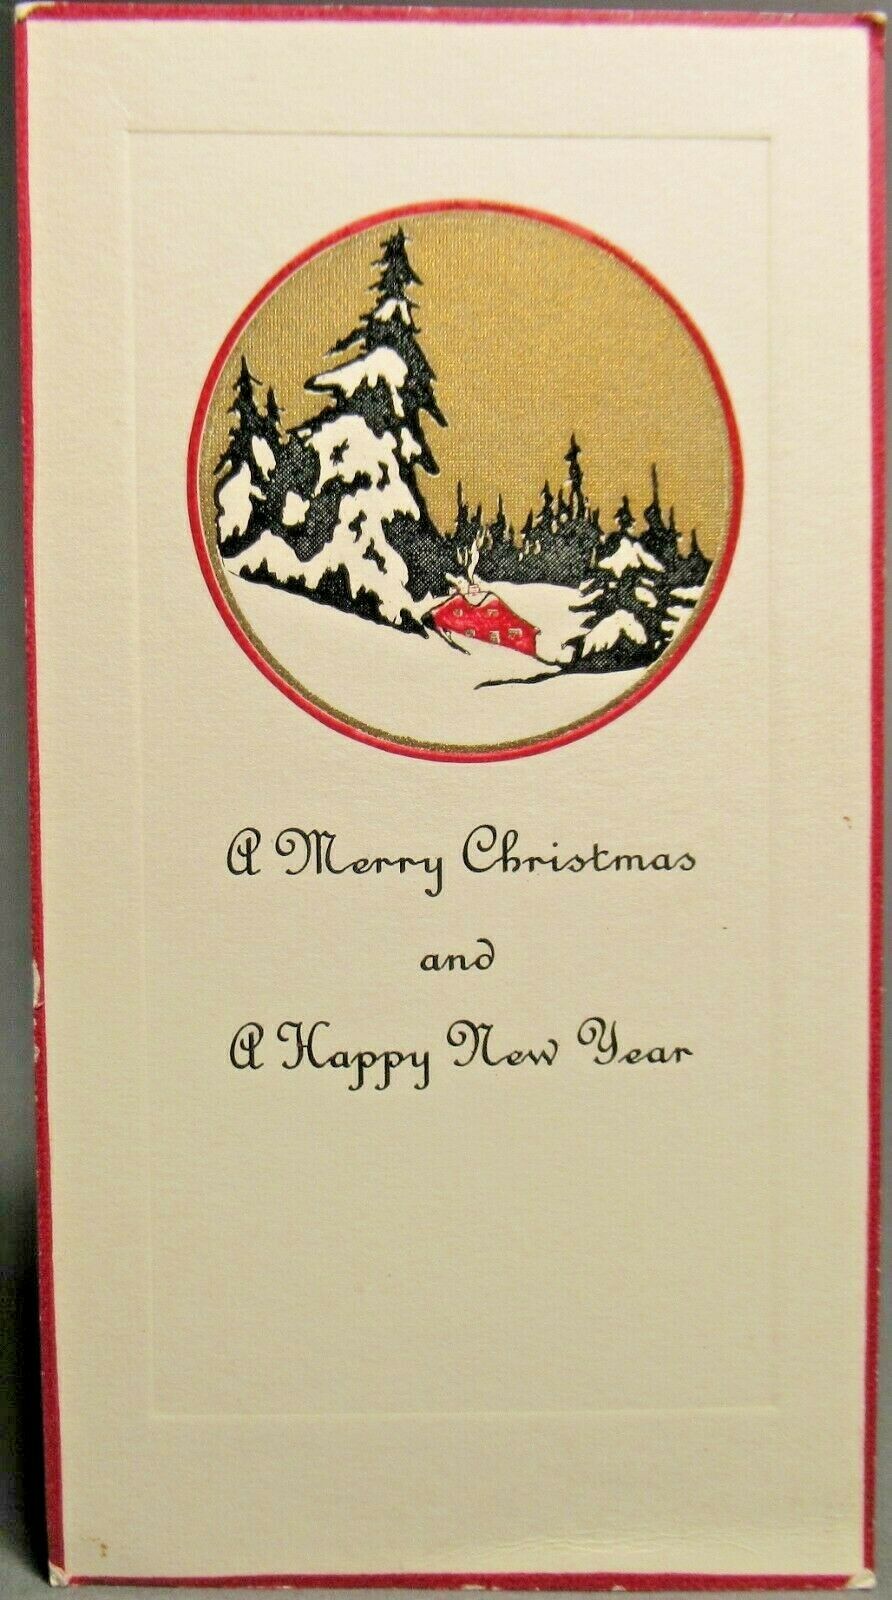 Vintage "a Merry Christmas And A Happy New Year" Greeting Card.